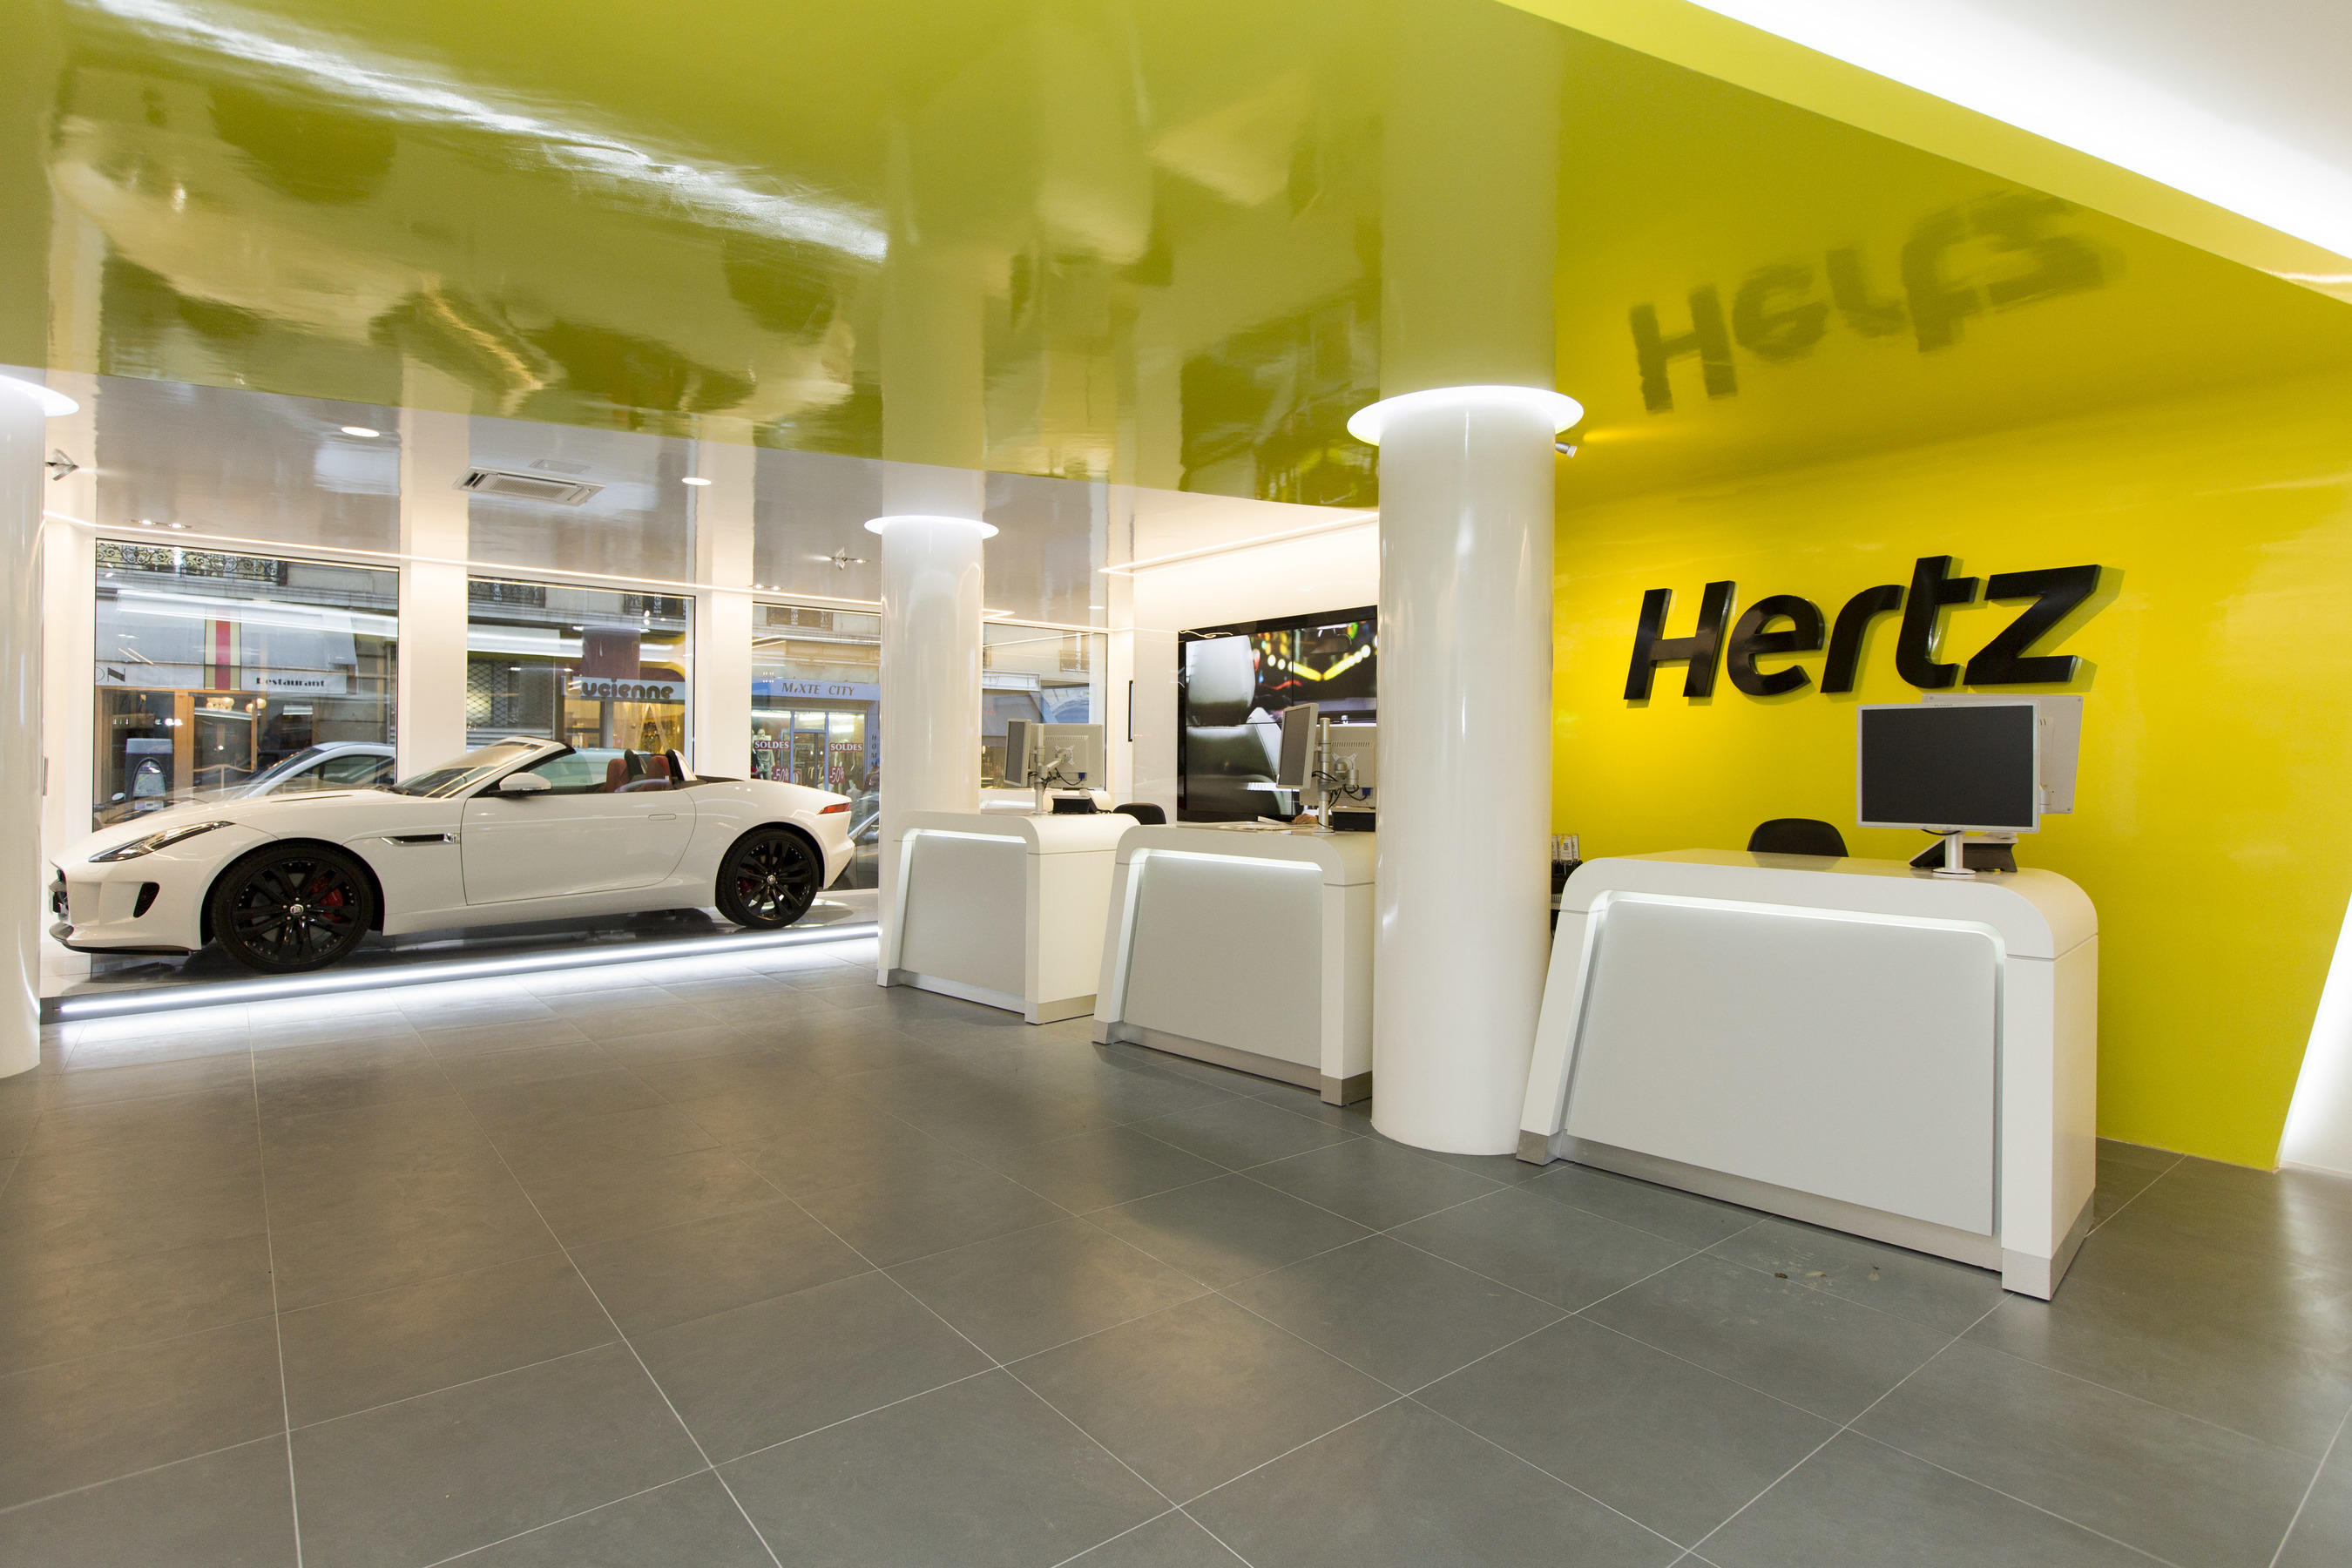 Hertz has given its premier Paris city location (Saint Ferdinand) a high tech makeover as part of the company's global reinvention of the car rental experience. Customers are welcomed into a spacious, streamlined layout with a personalized, interactive service and the latest technology innovations in the car rental industry. (PRNewsFoto/The Hertz Corporation)